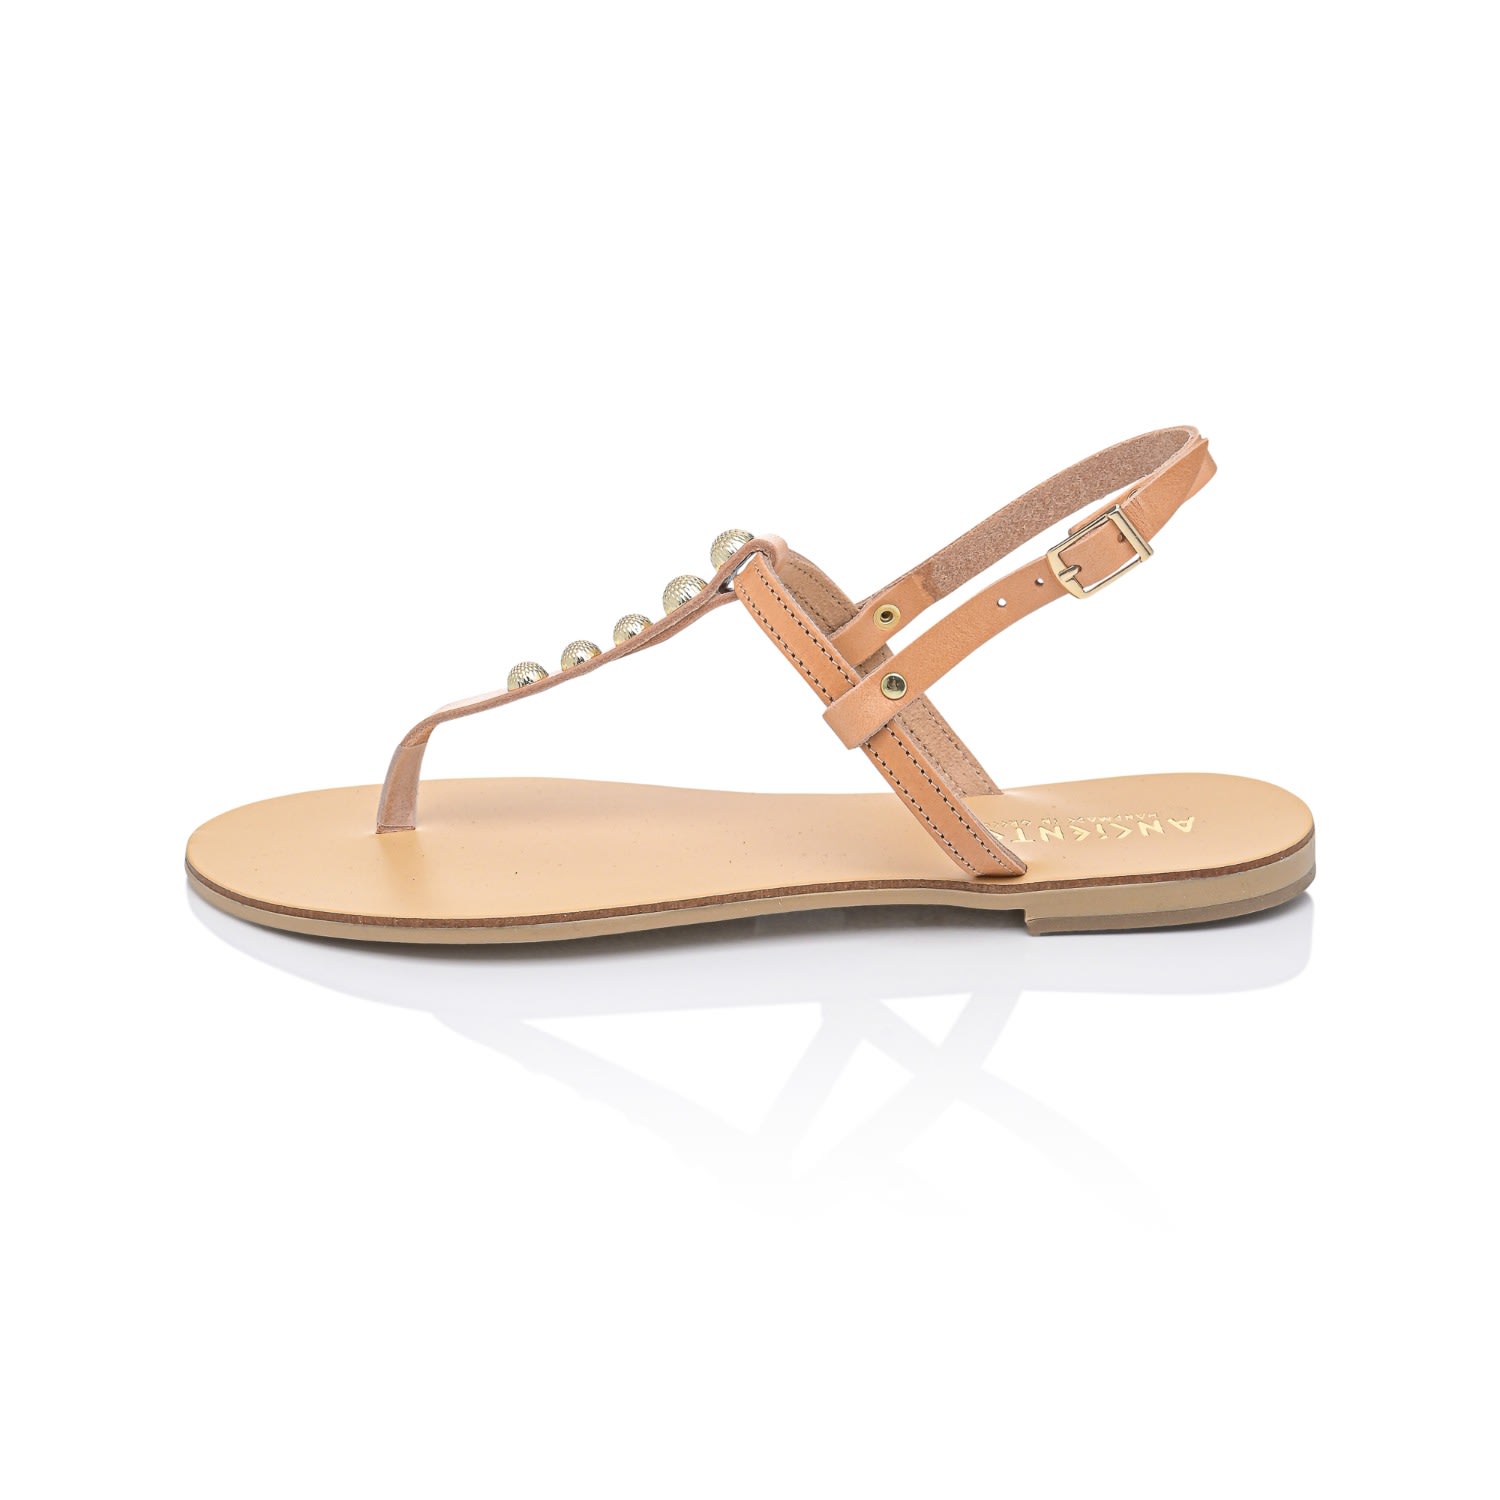 Neutrals Melina Handcrafted Leather Flat Sandals With Silver Accents - Designer Women’s Flat Sandals With Toe Separator And Ankle Strap 5 Uk Ancientoo